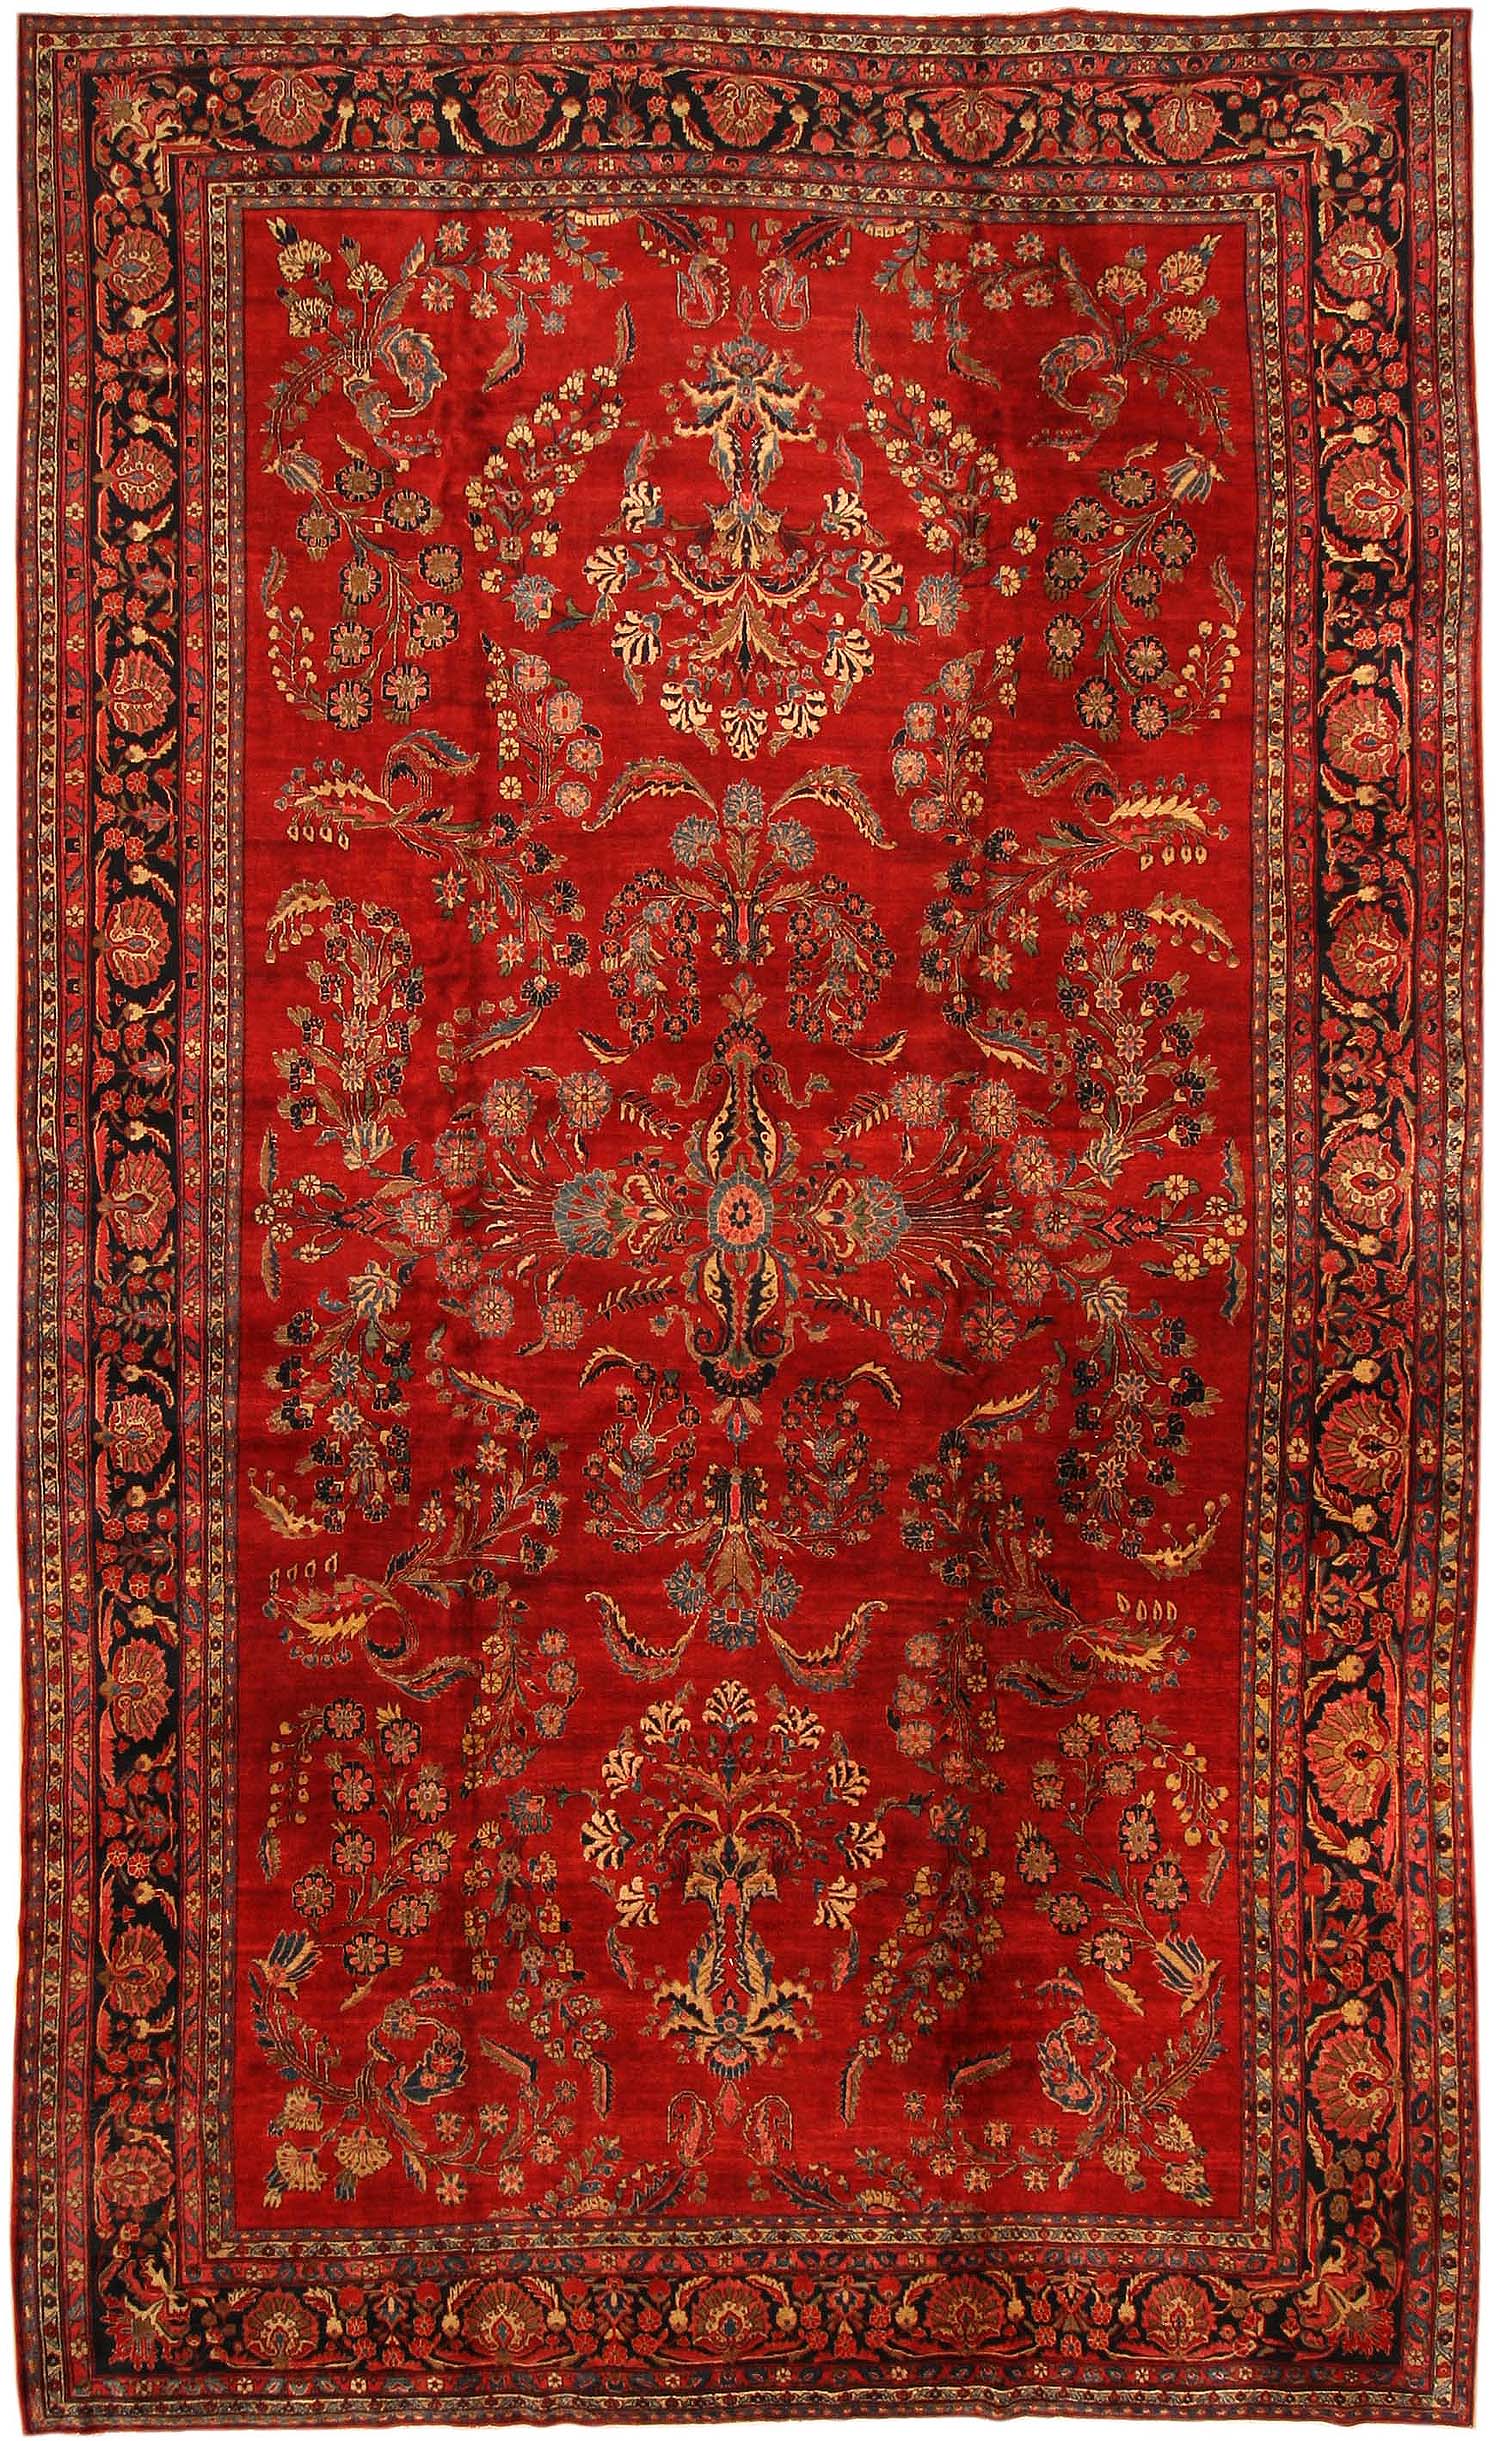 Best 17 Images About Rug On Pinterest Persian House Tours And red persian rug